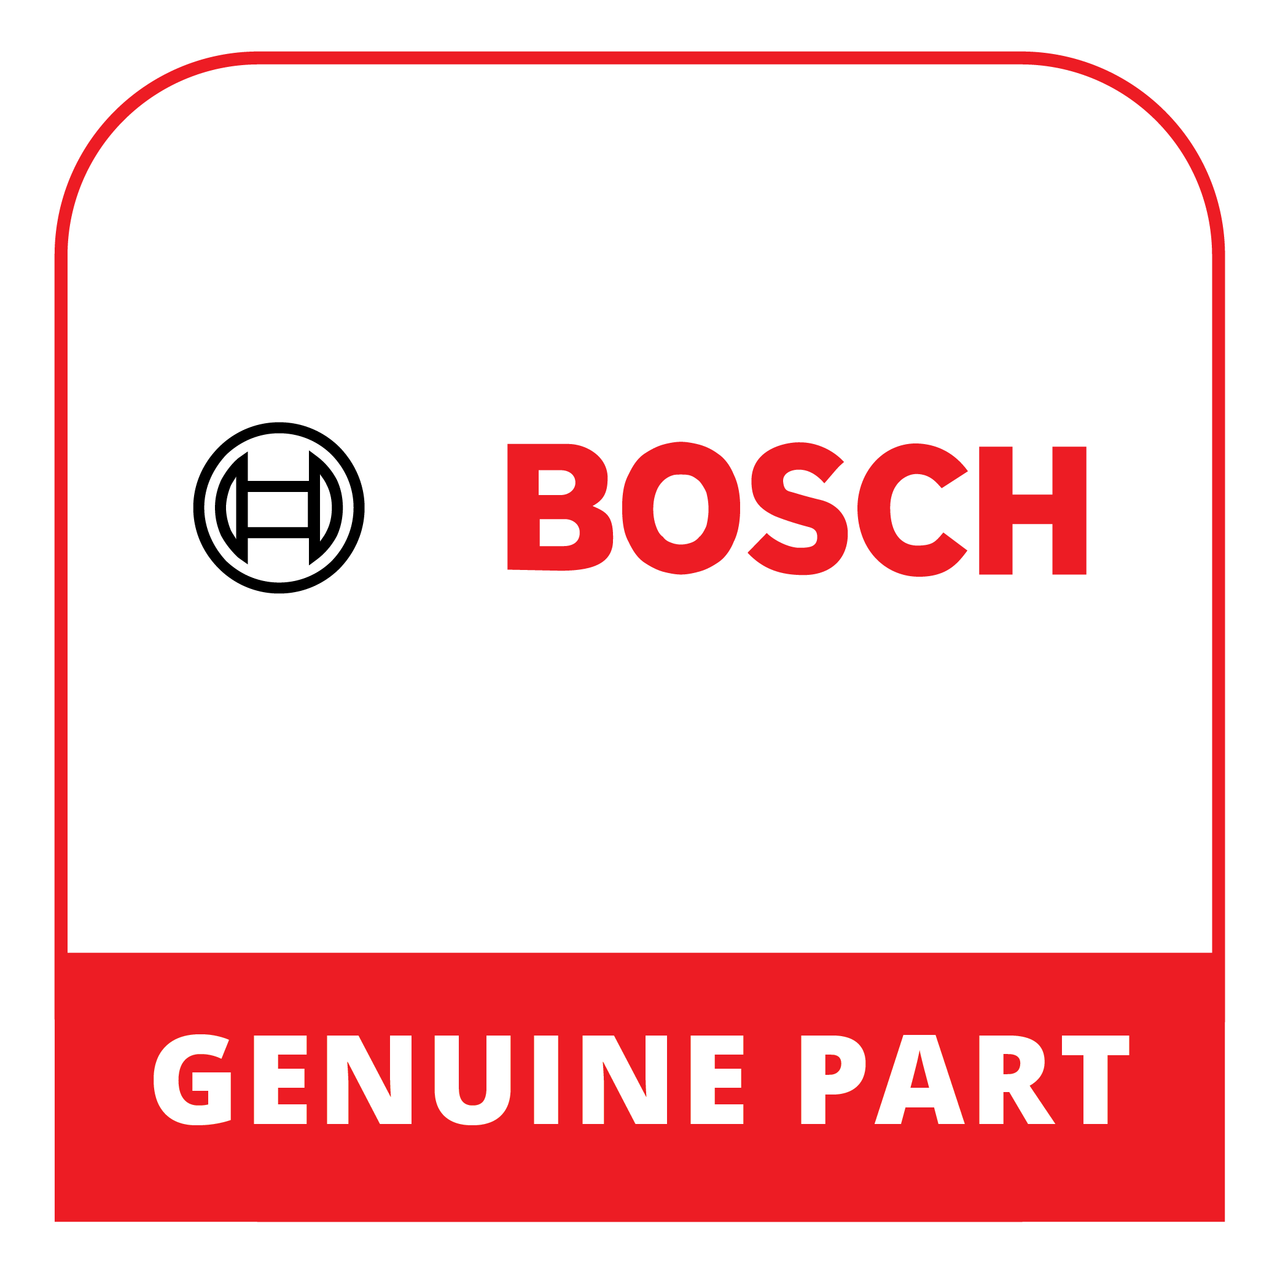 Bosch (Thermador) 11034270 - Cover - Genuine Bosch (Thermador) Part